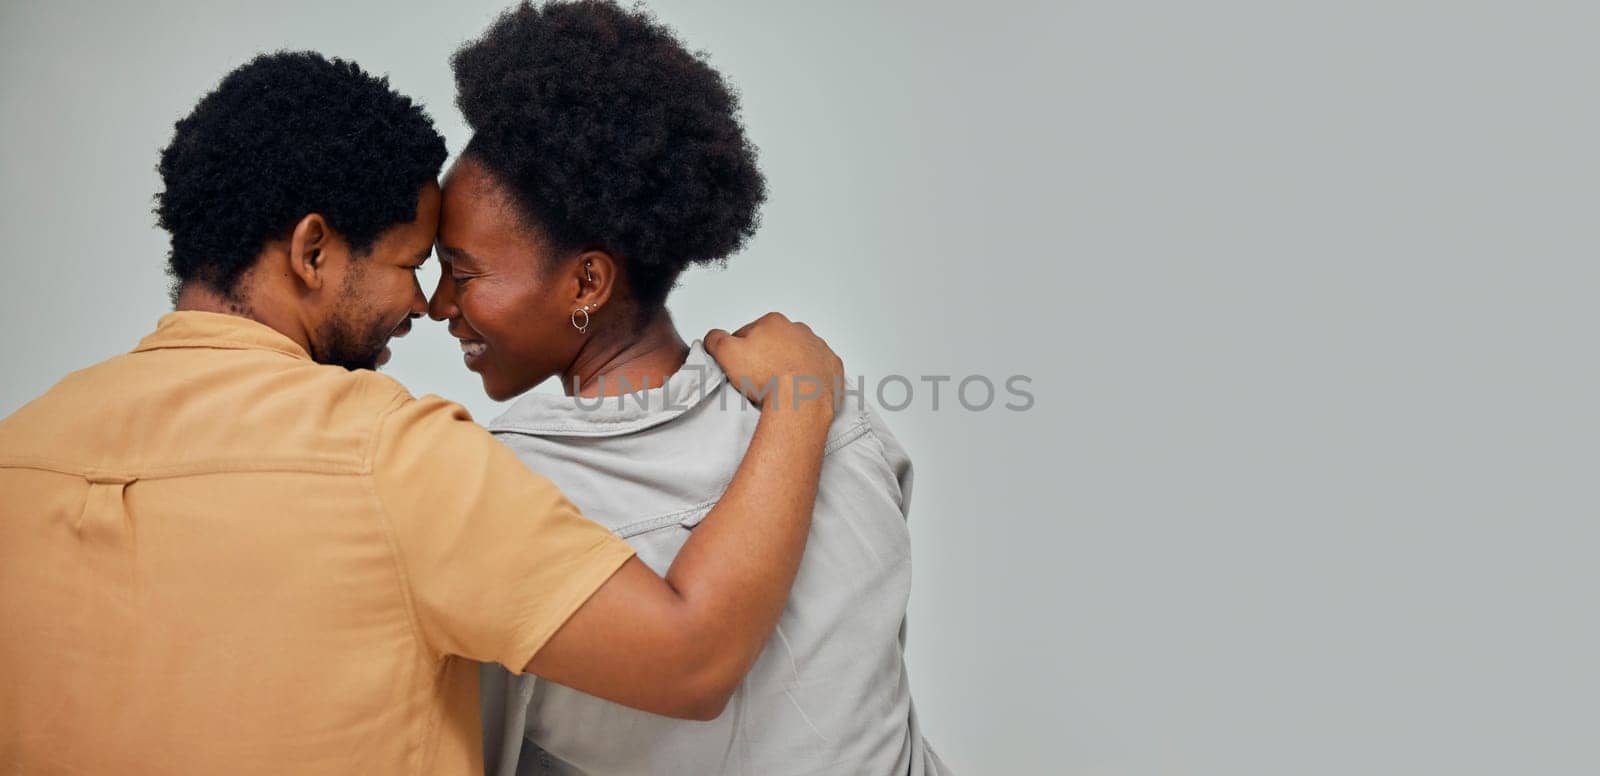 Mockup, wall background or black couple love bonding, hugging or enjoying quality time together at home. Back view, forehead or African man with a happy woman hug while relaxing in apartment or house.